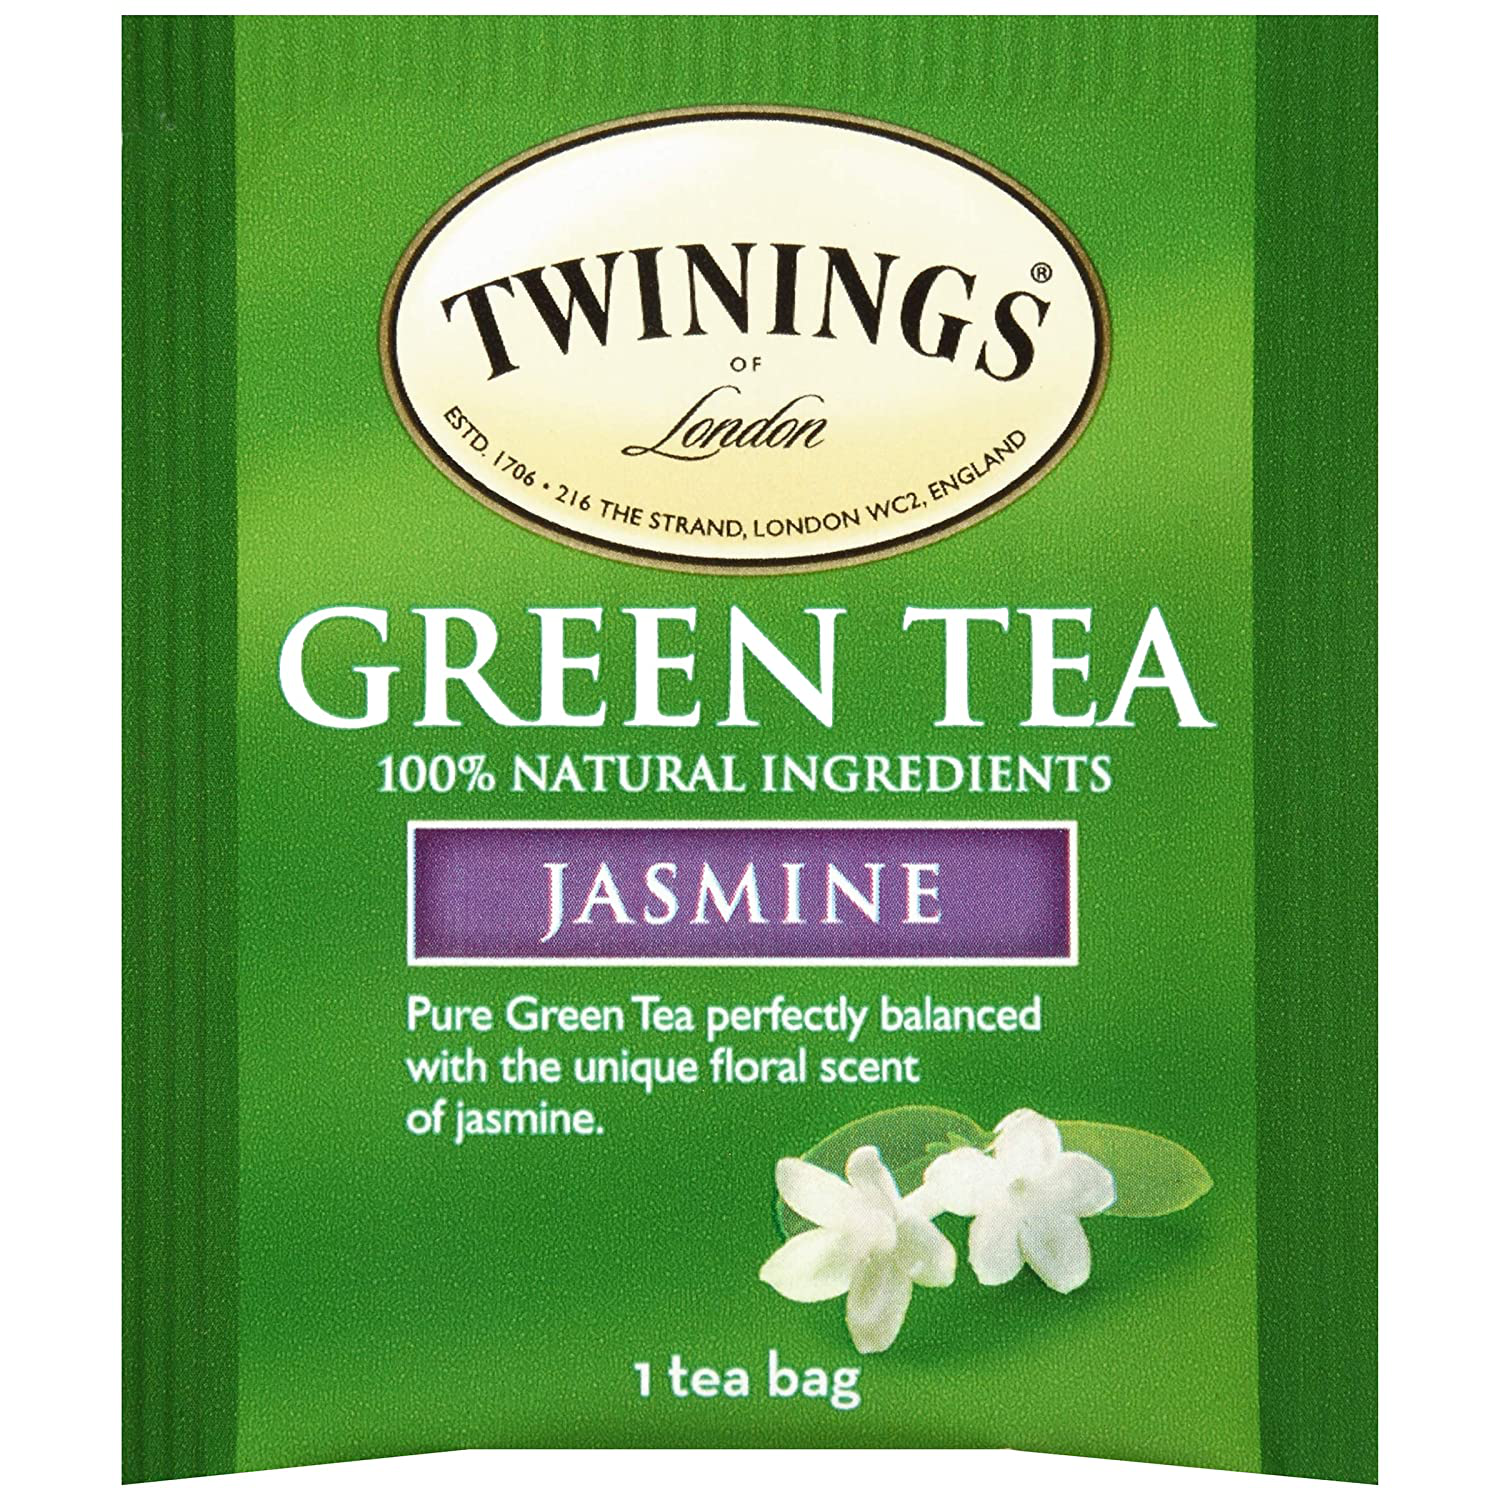 Twinings of London Pure Peppermint Tea Bags, 25 Count (Pack of 6)